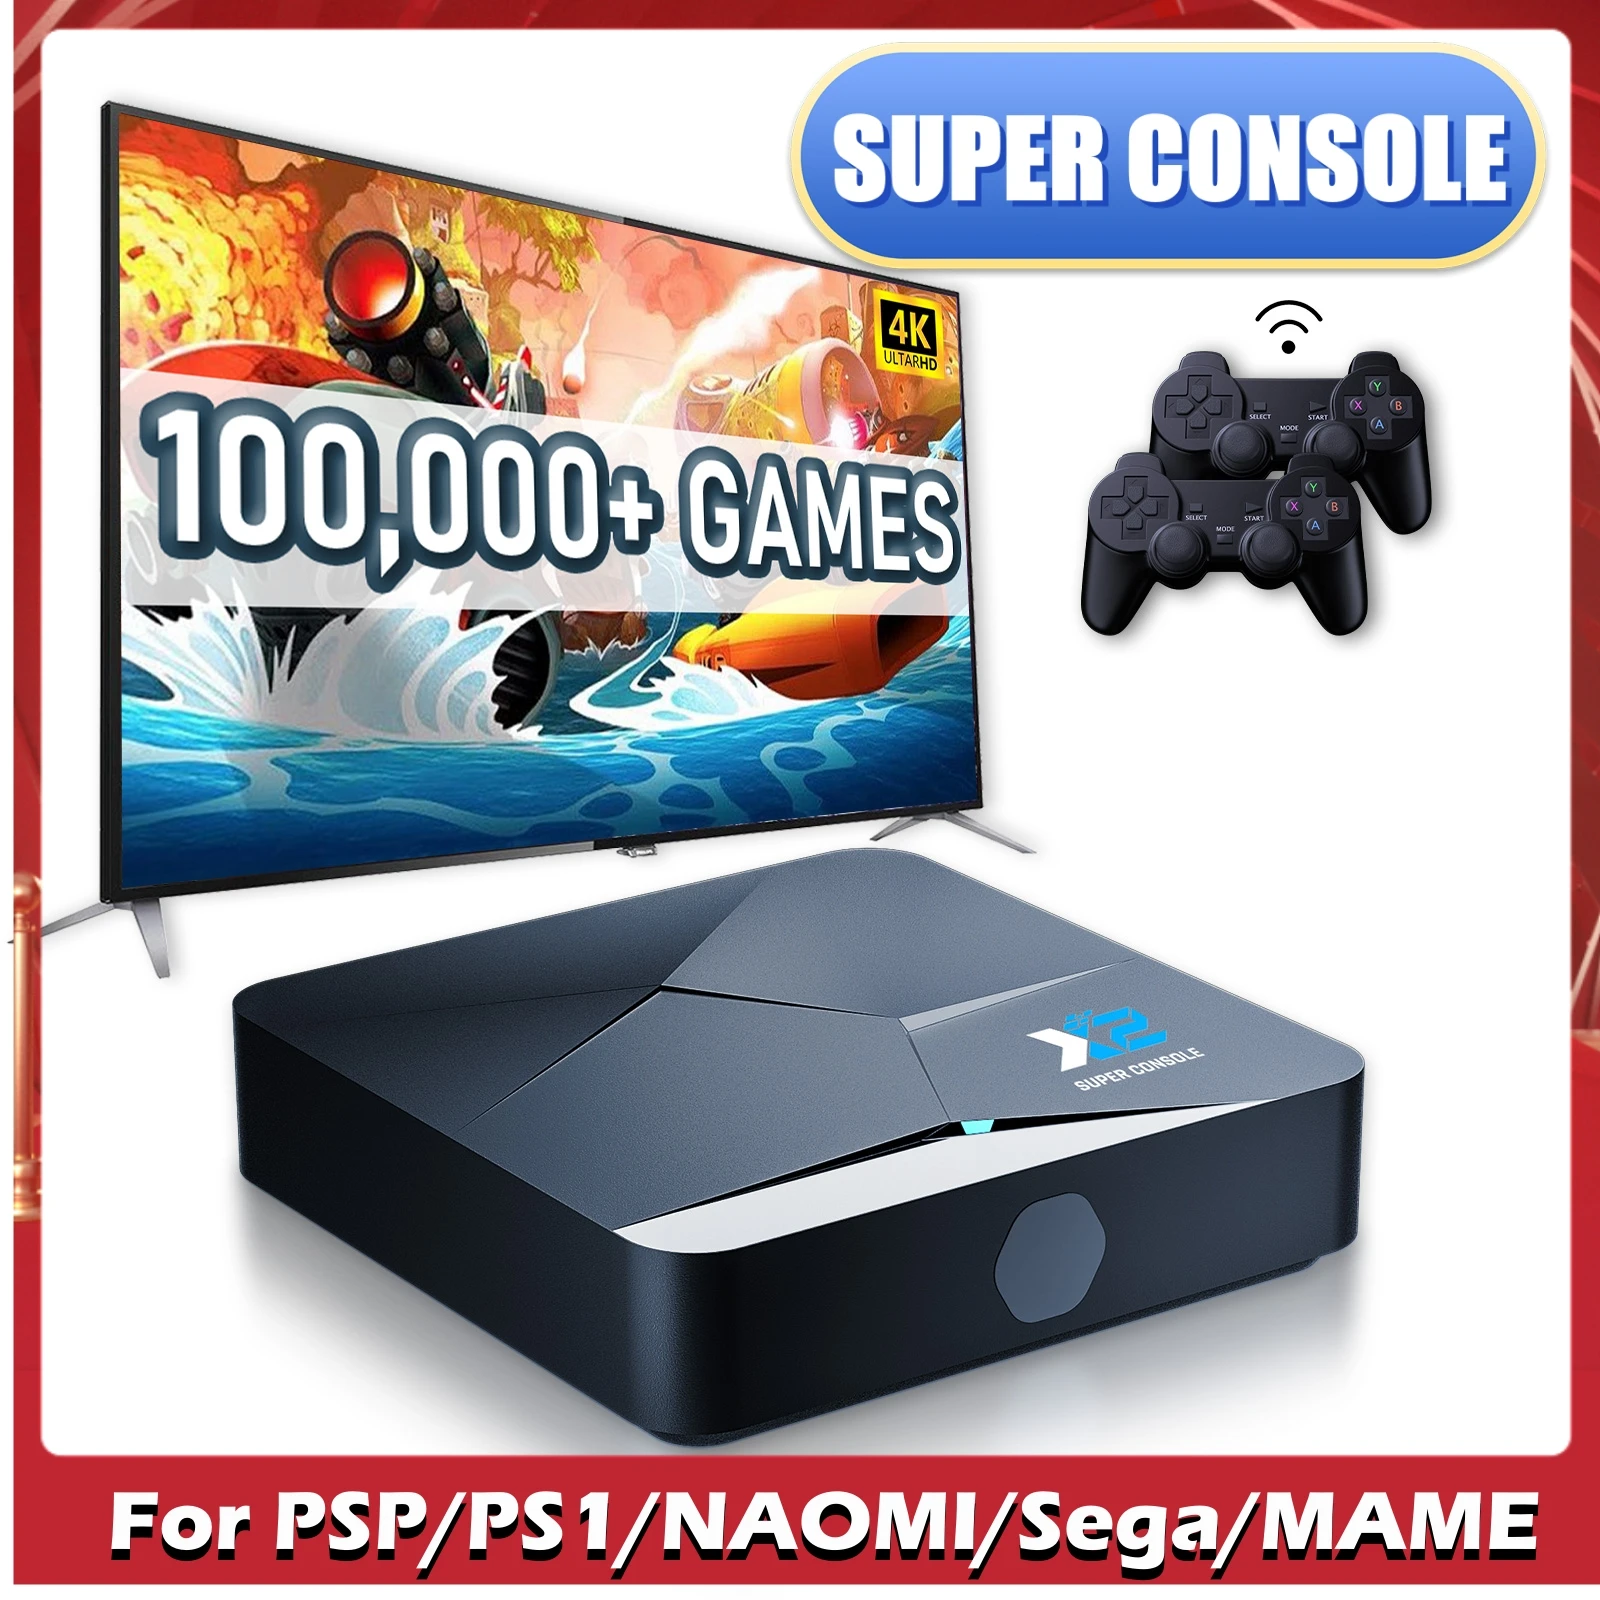 Super Console X2 Dual System In One With 100000+ Retro Video Games, 70+ Emulators, For PSP/PS1/Sega/NAOMI Etc. BT 5.0 4K UHD